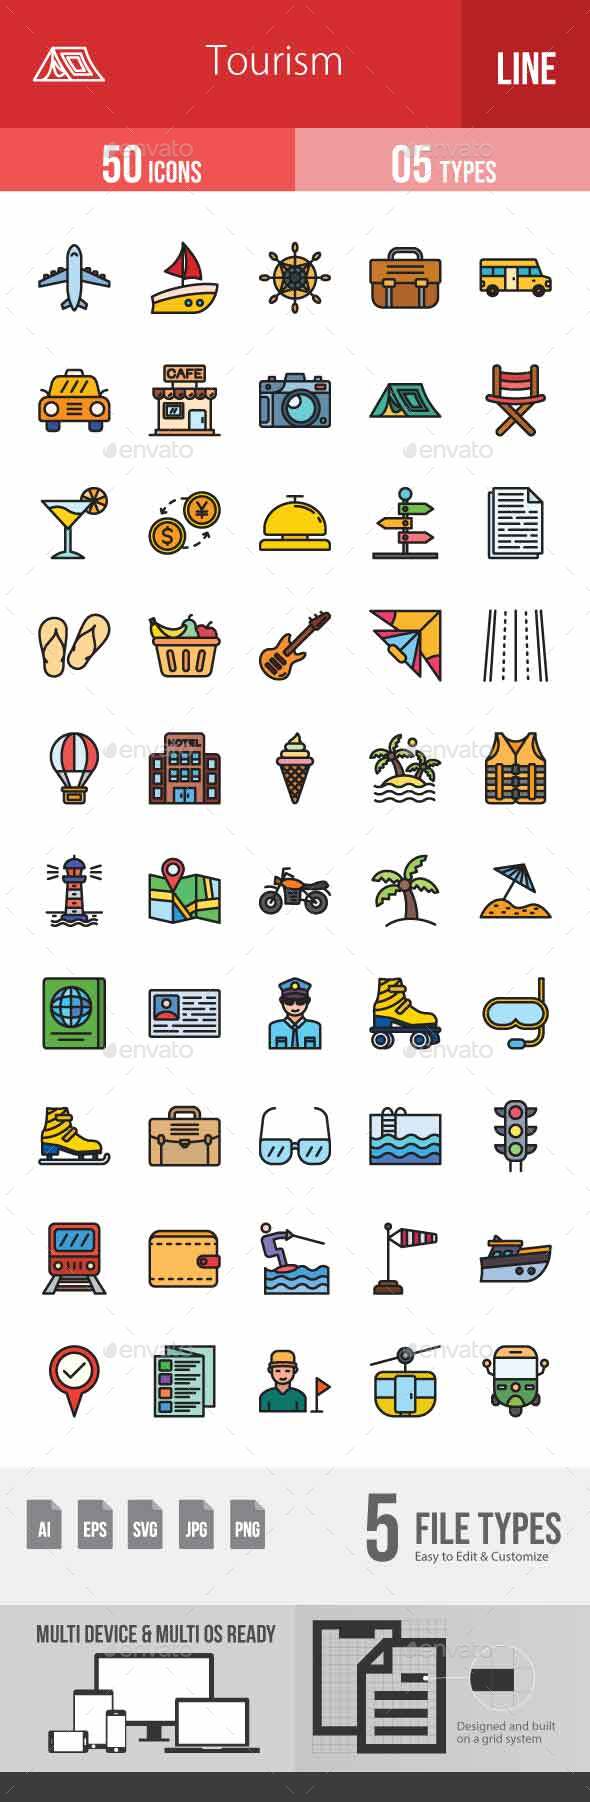 [DOWNLOAD]Tourism Filled Line Icons